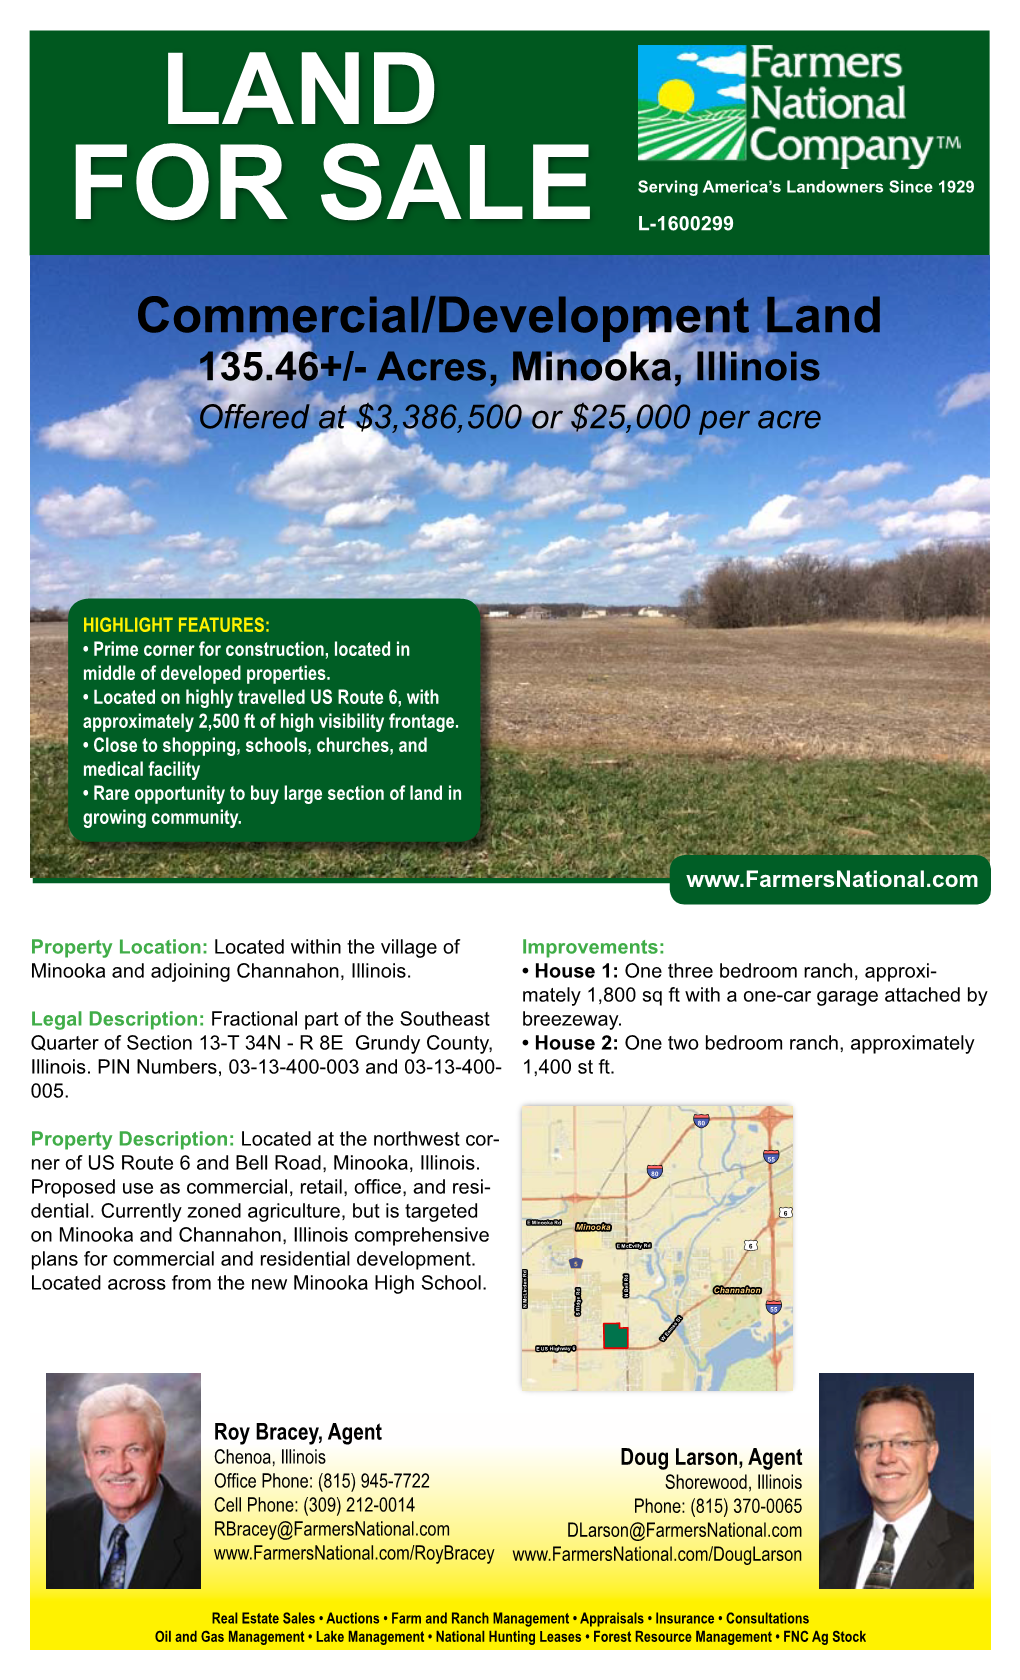 Commercial/Development Land 135.46+/- Acres, Minooka, Illinois Offered at $3,386,500 Or $25,000 Per Acre